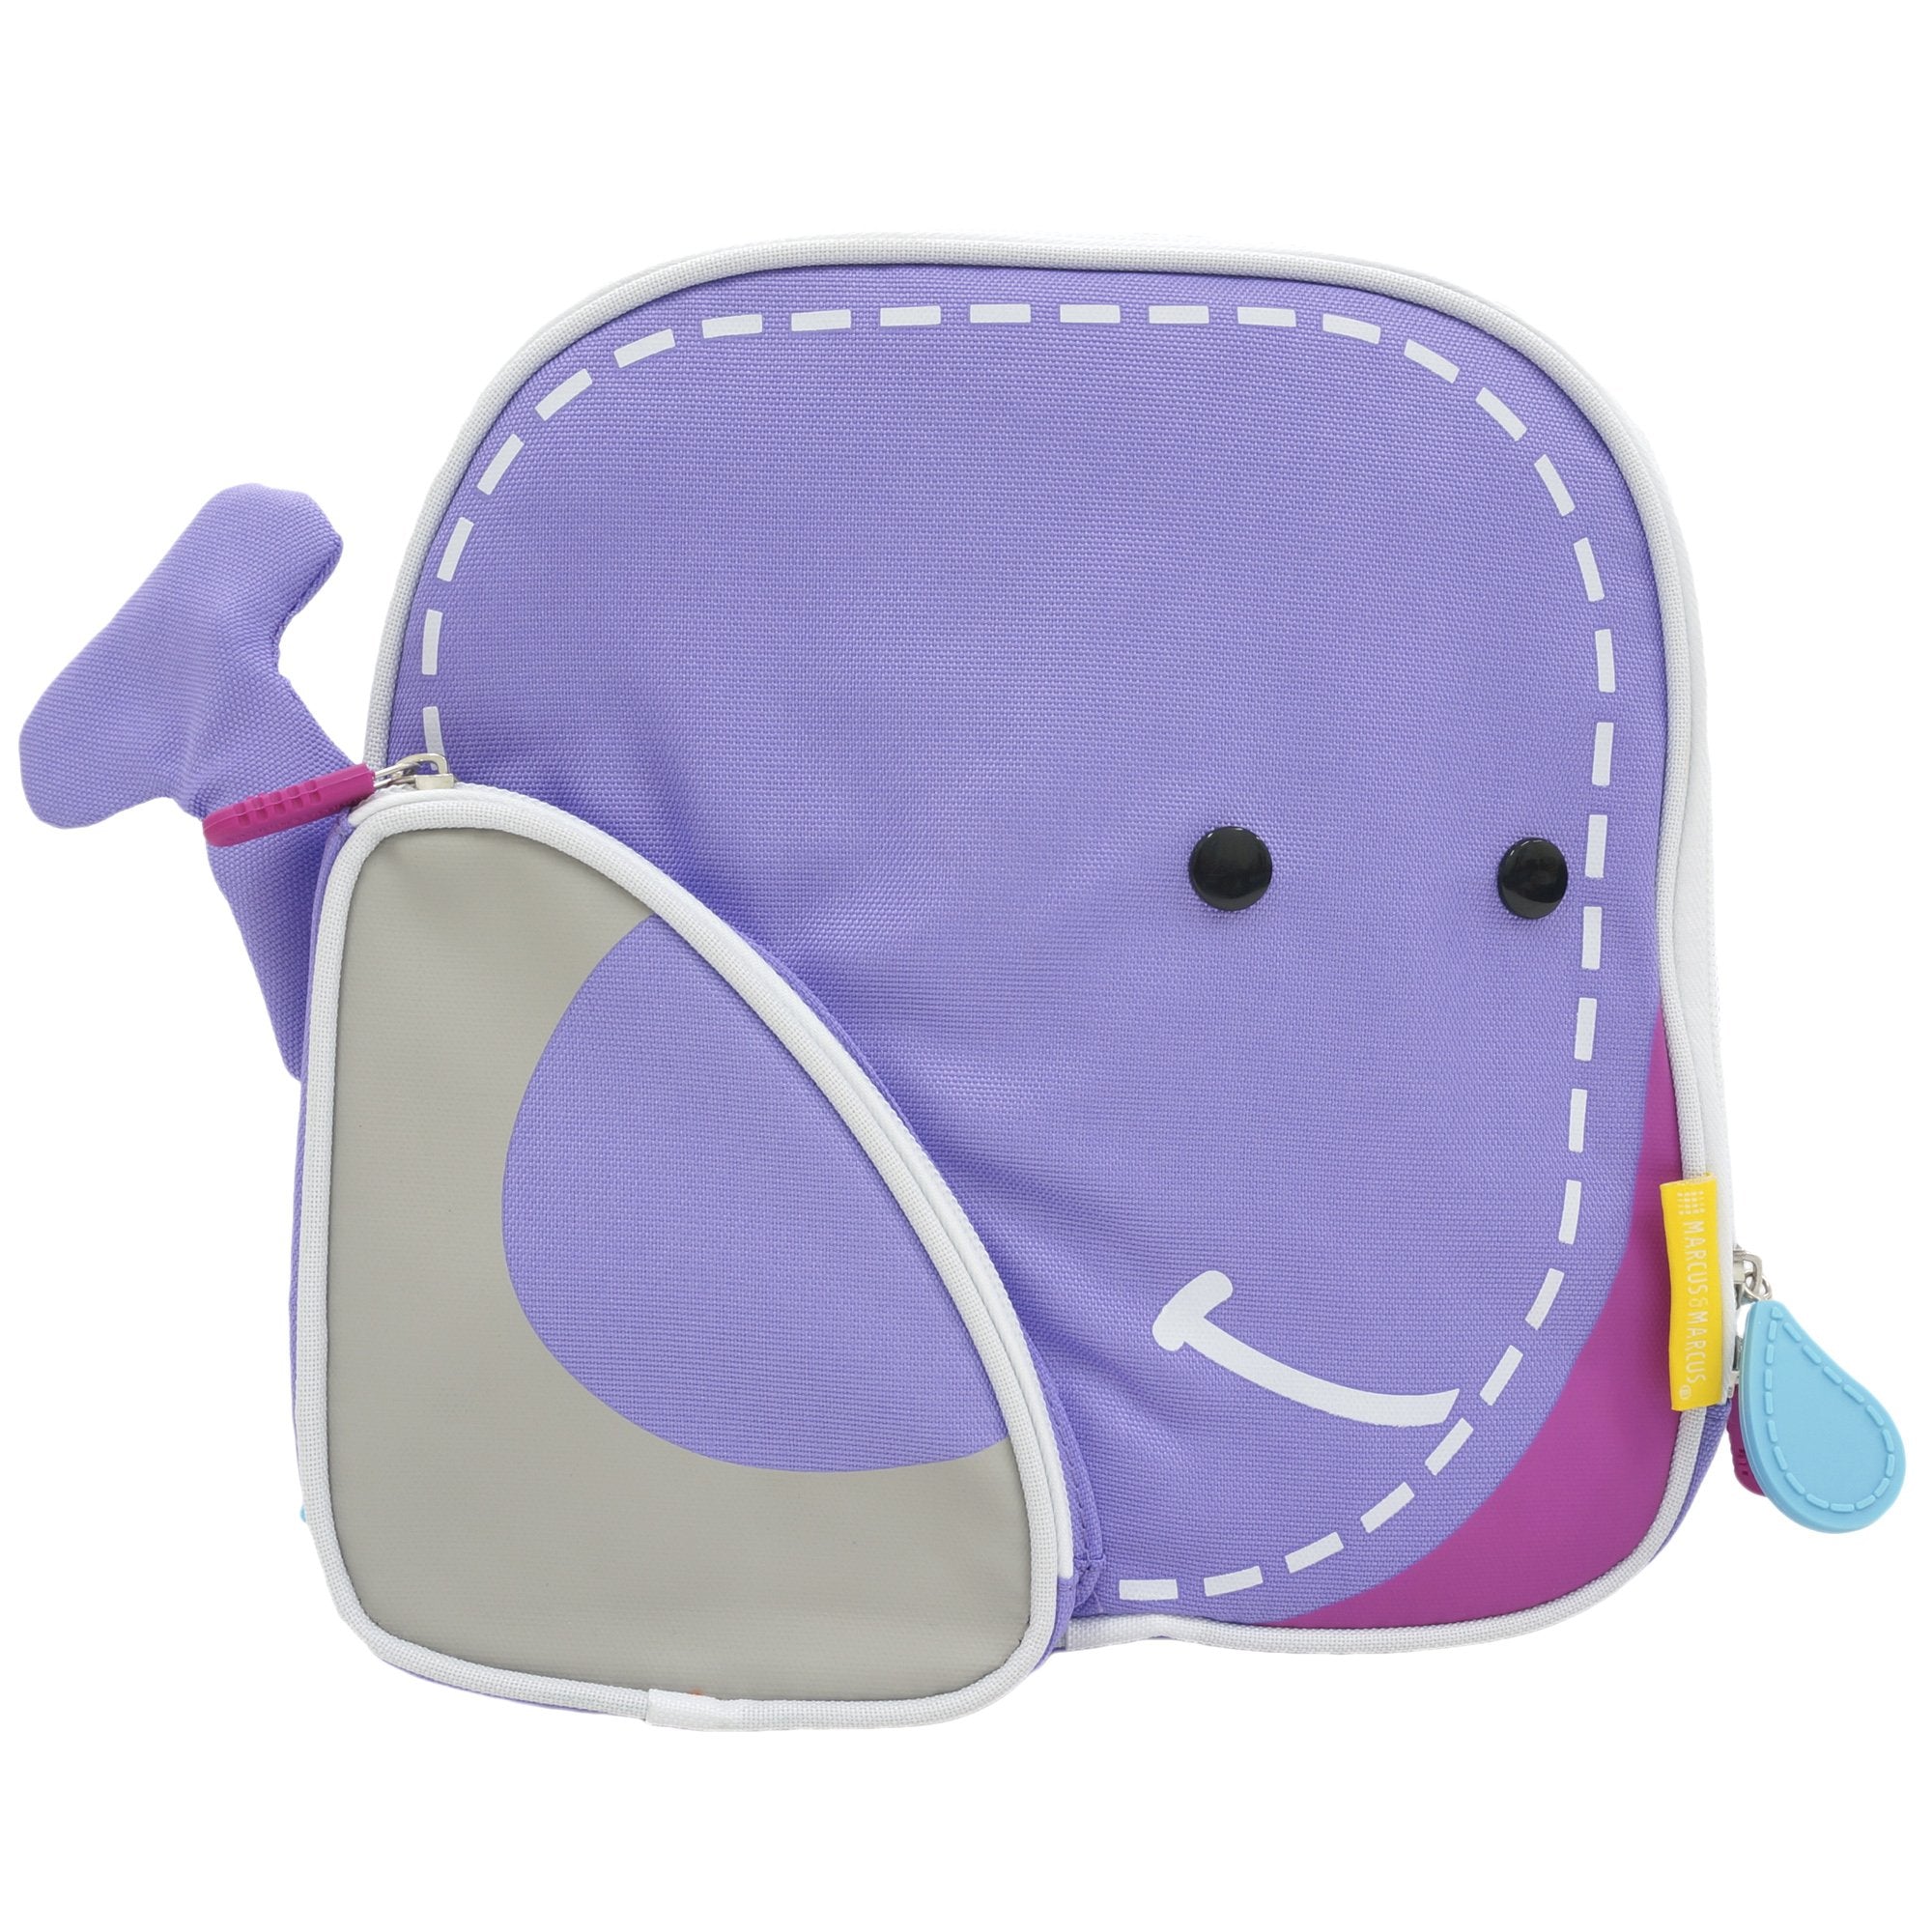 Marcus & Marcus Insulated Lunch Bag - Willo